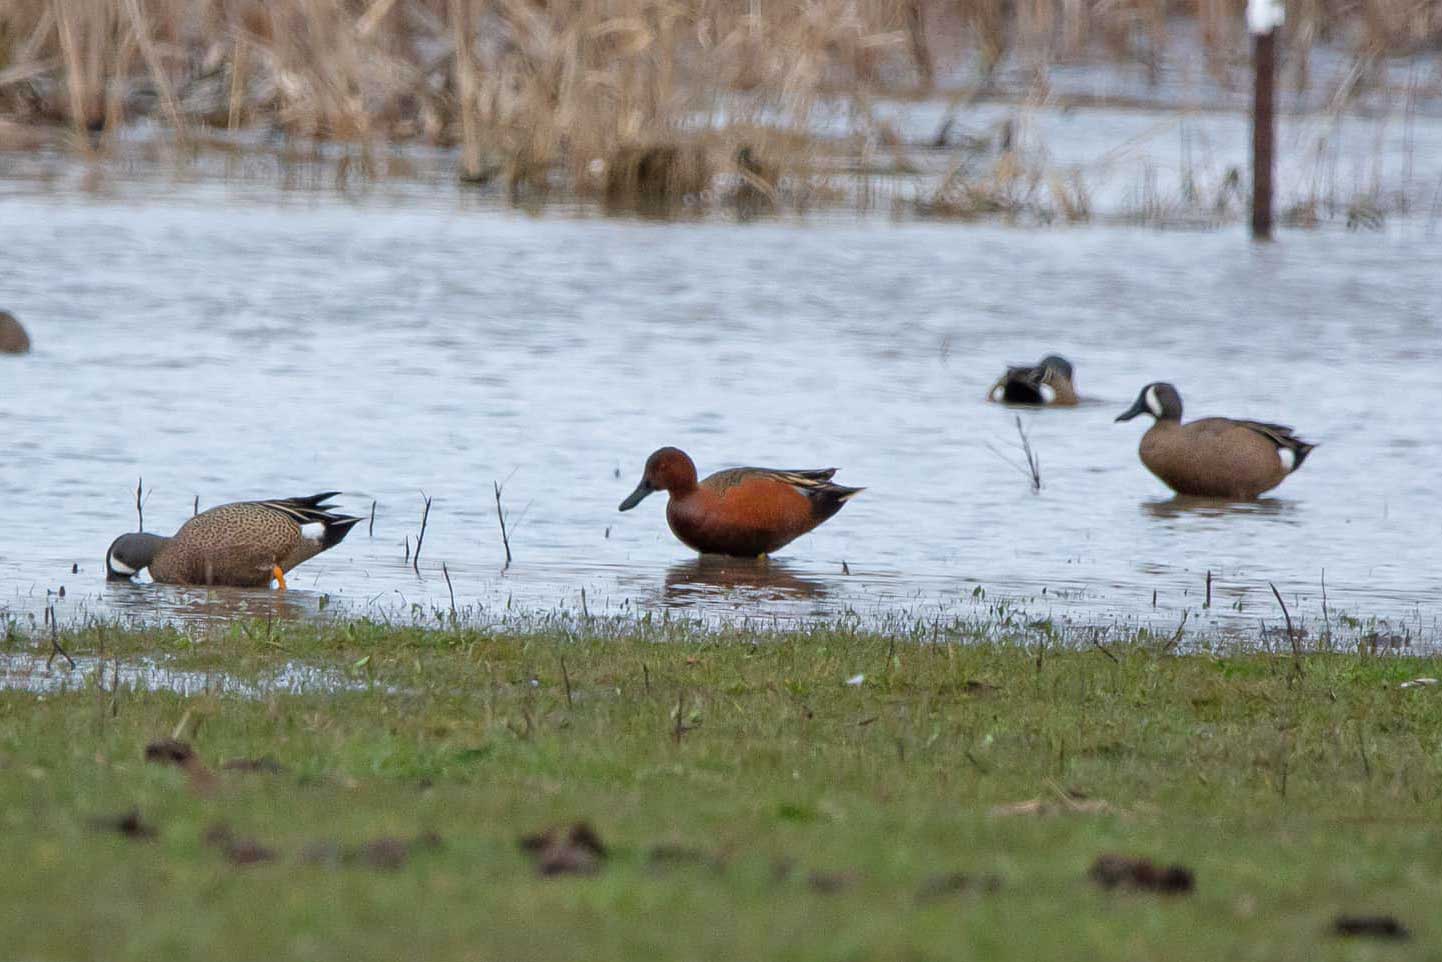  A cinnamon teal, with its brown body, is seen in the middle surrounded by blue-winged teals.